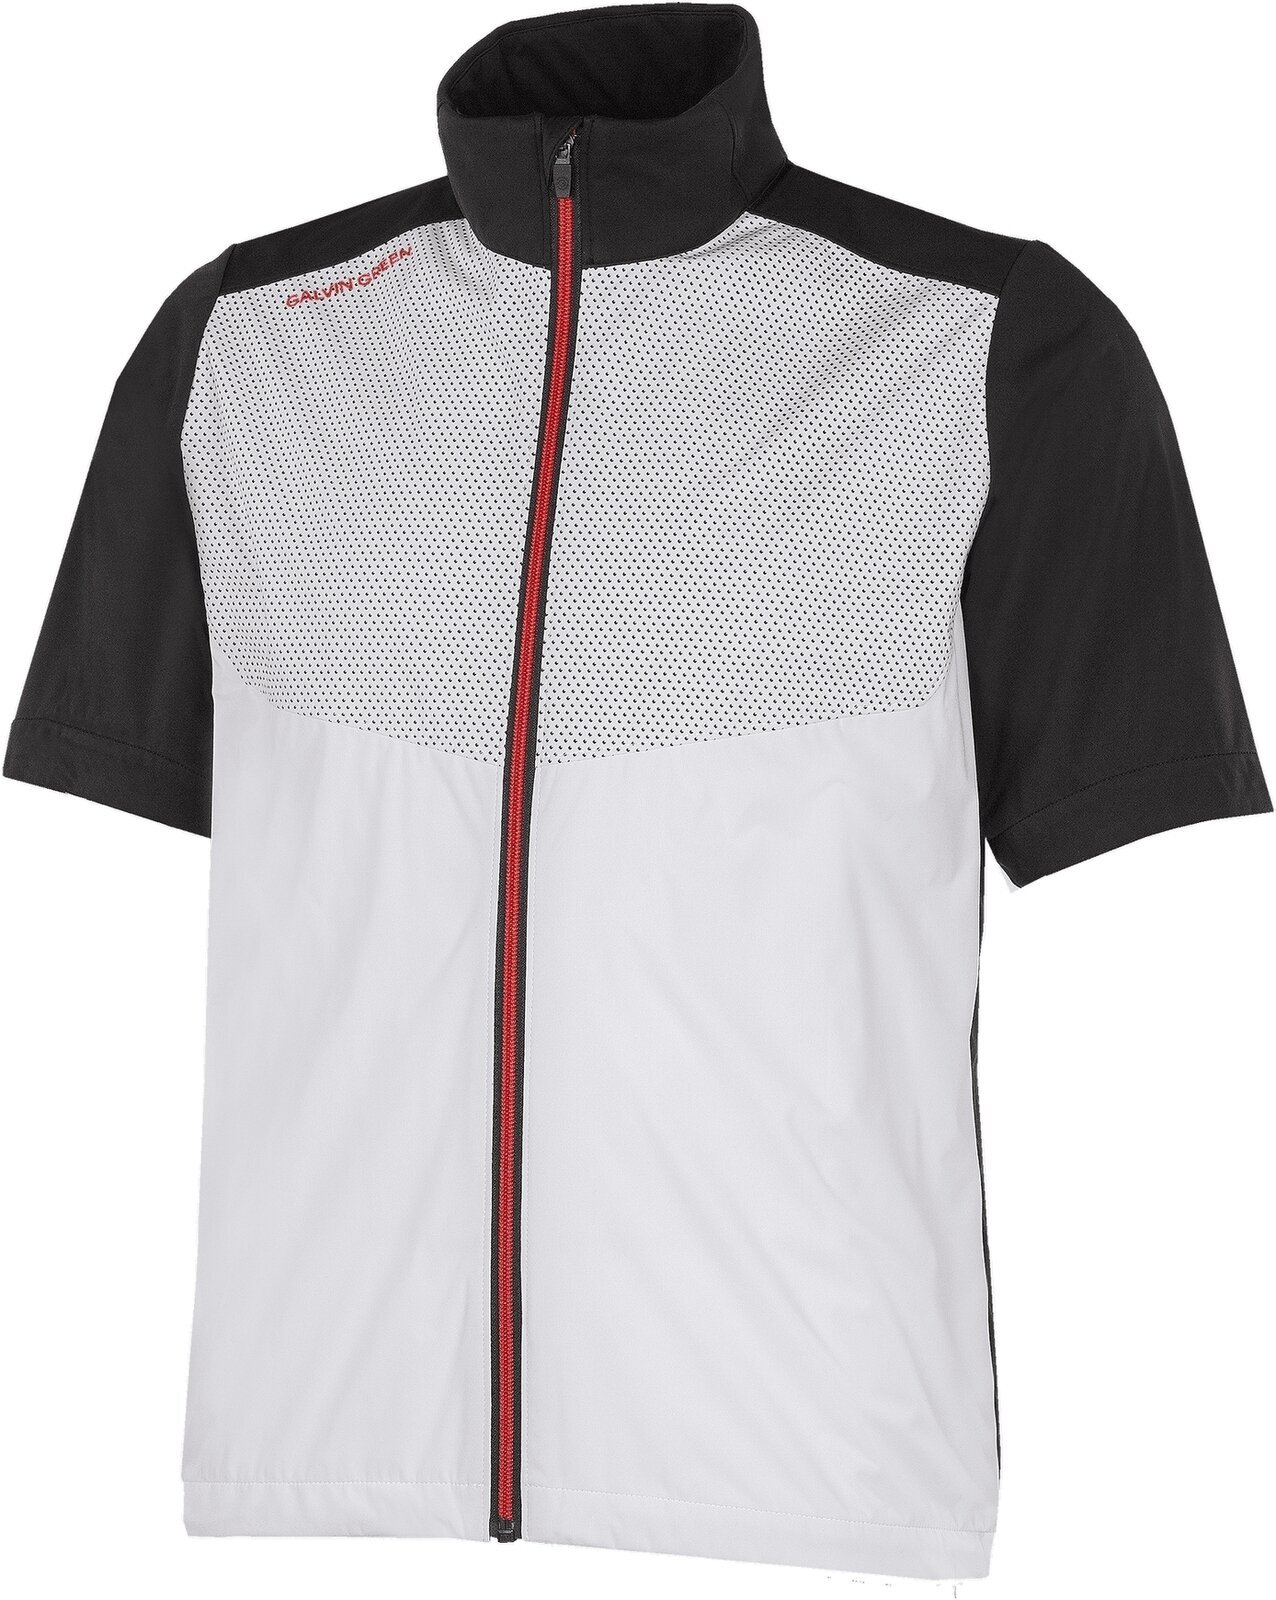 яке Galvin Green Livingston Mens Windproof And Water Repellent Short Sleeve Jacket White/Black/Red L